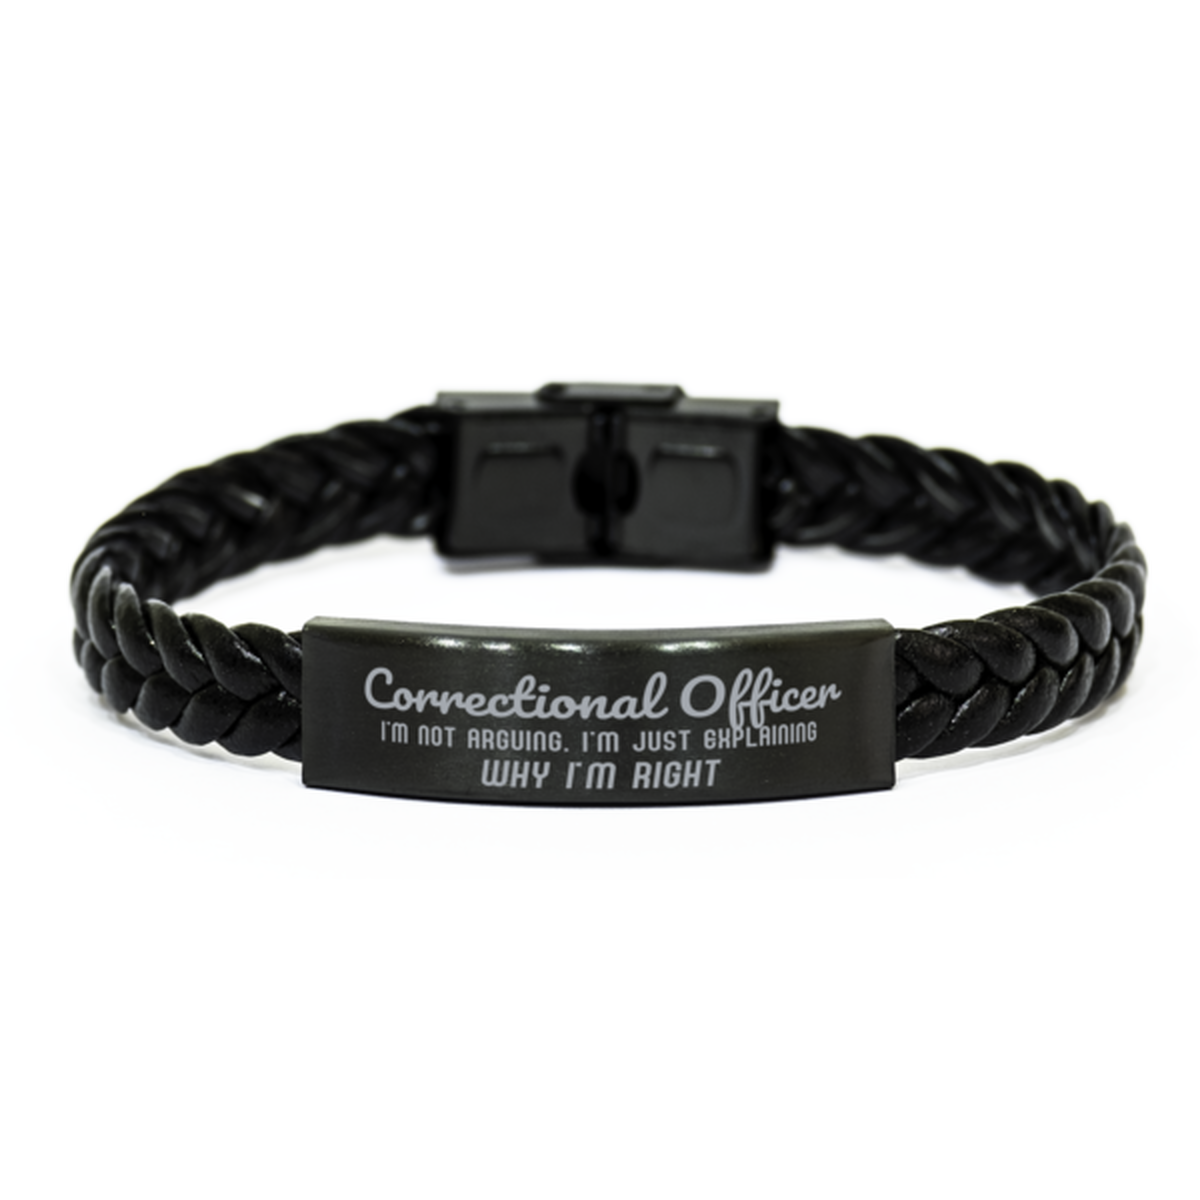 Correctional Officer I'm not Arguing. I'm Just Explaining Why I'm RIGHT Braided Leather Bracelet, Graduation Birthday Christmas Correctional Officer Gifts For Correctional Officer Funny Saying Quote Present for Men Women Coworker